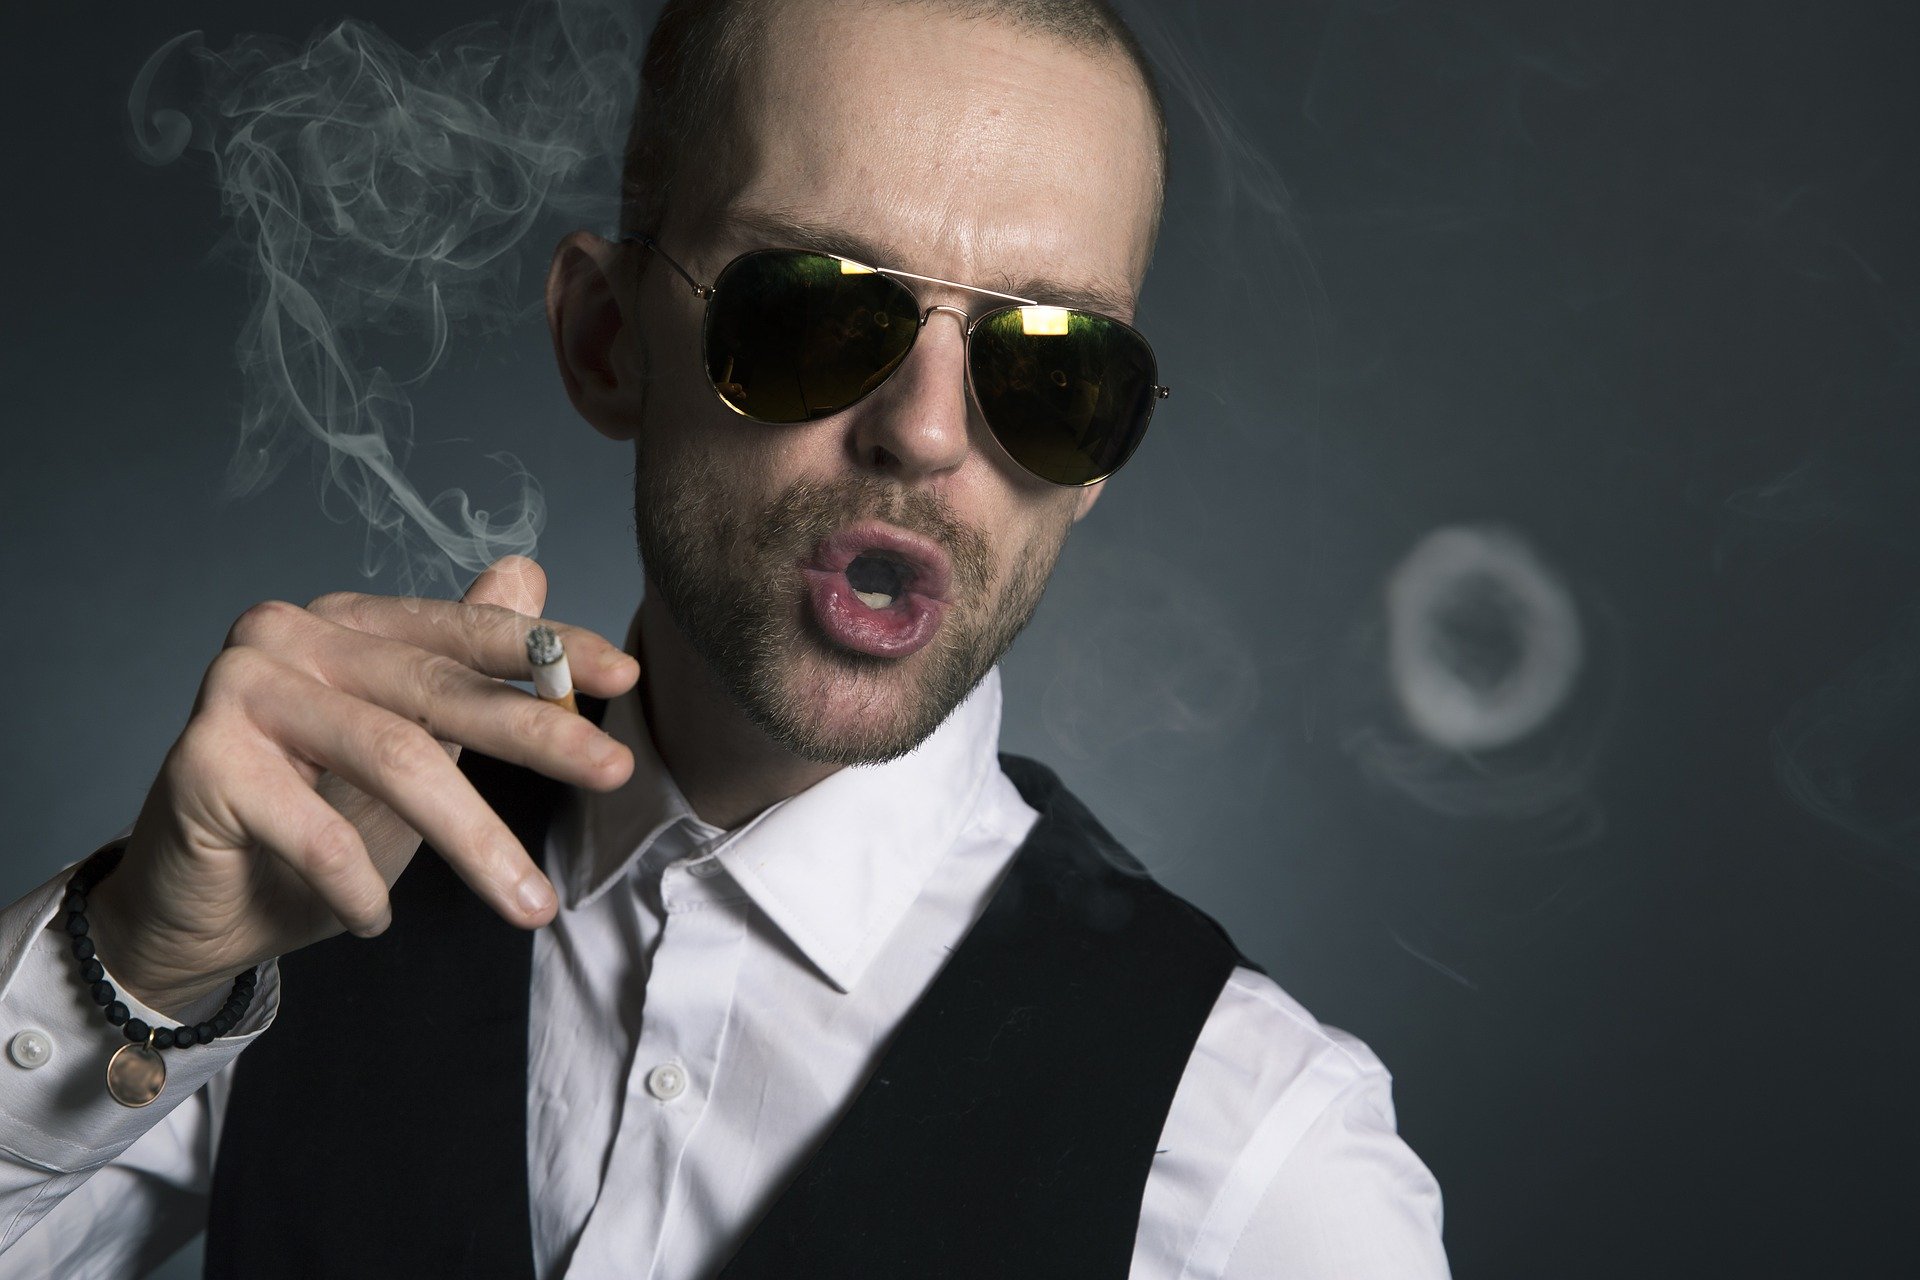 An arrogant rich man wearing sunglasses while blowing out cigarette smoke | Photo: Pixabay/Sammy-Williams